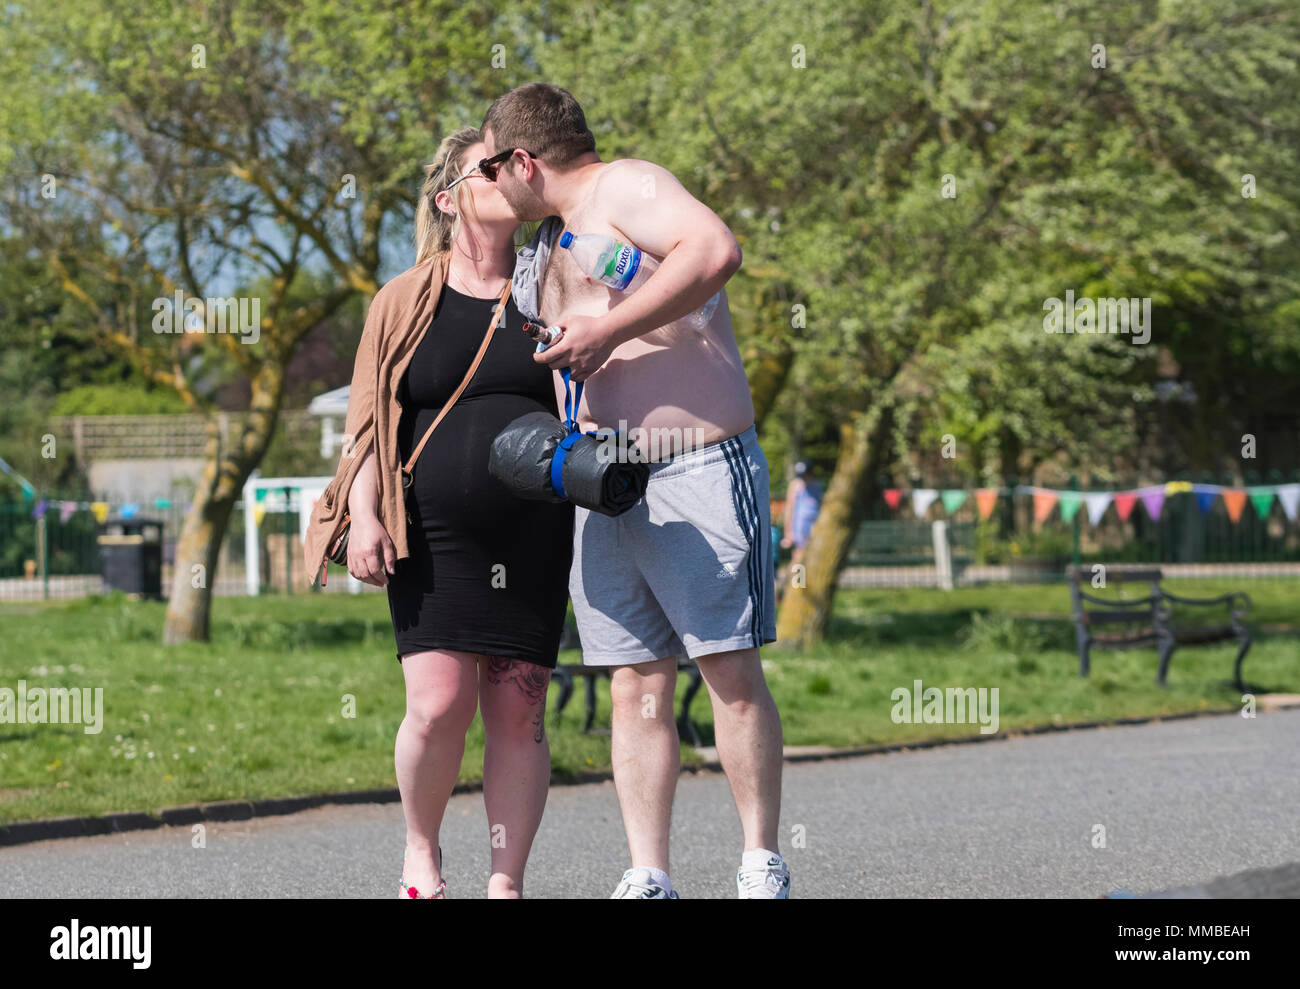 A young couple kissing in a park on a warm day in the UK. Public display of affection. PDA. Stock Photo